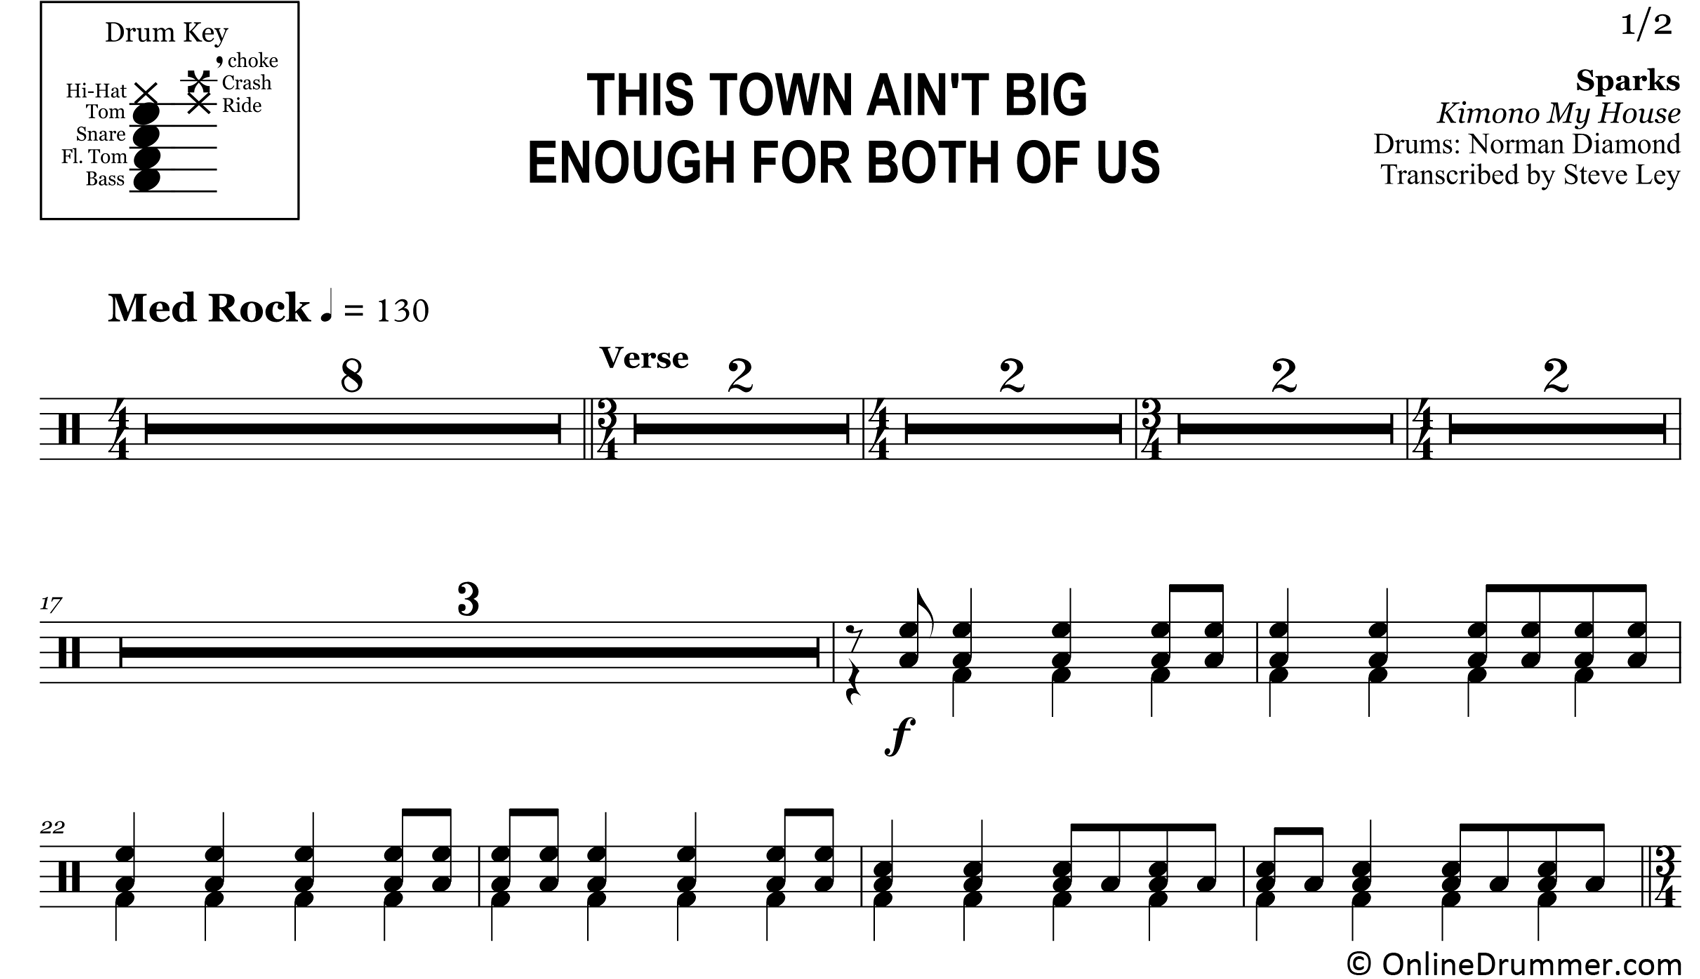 This Town Ain't Big Enough for Both of Us - Sparks - Drum Sheet Music